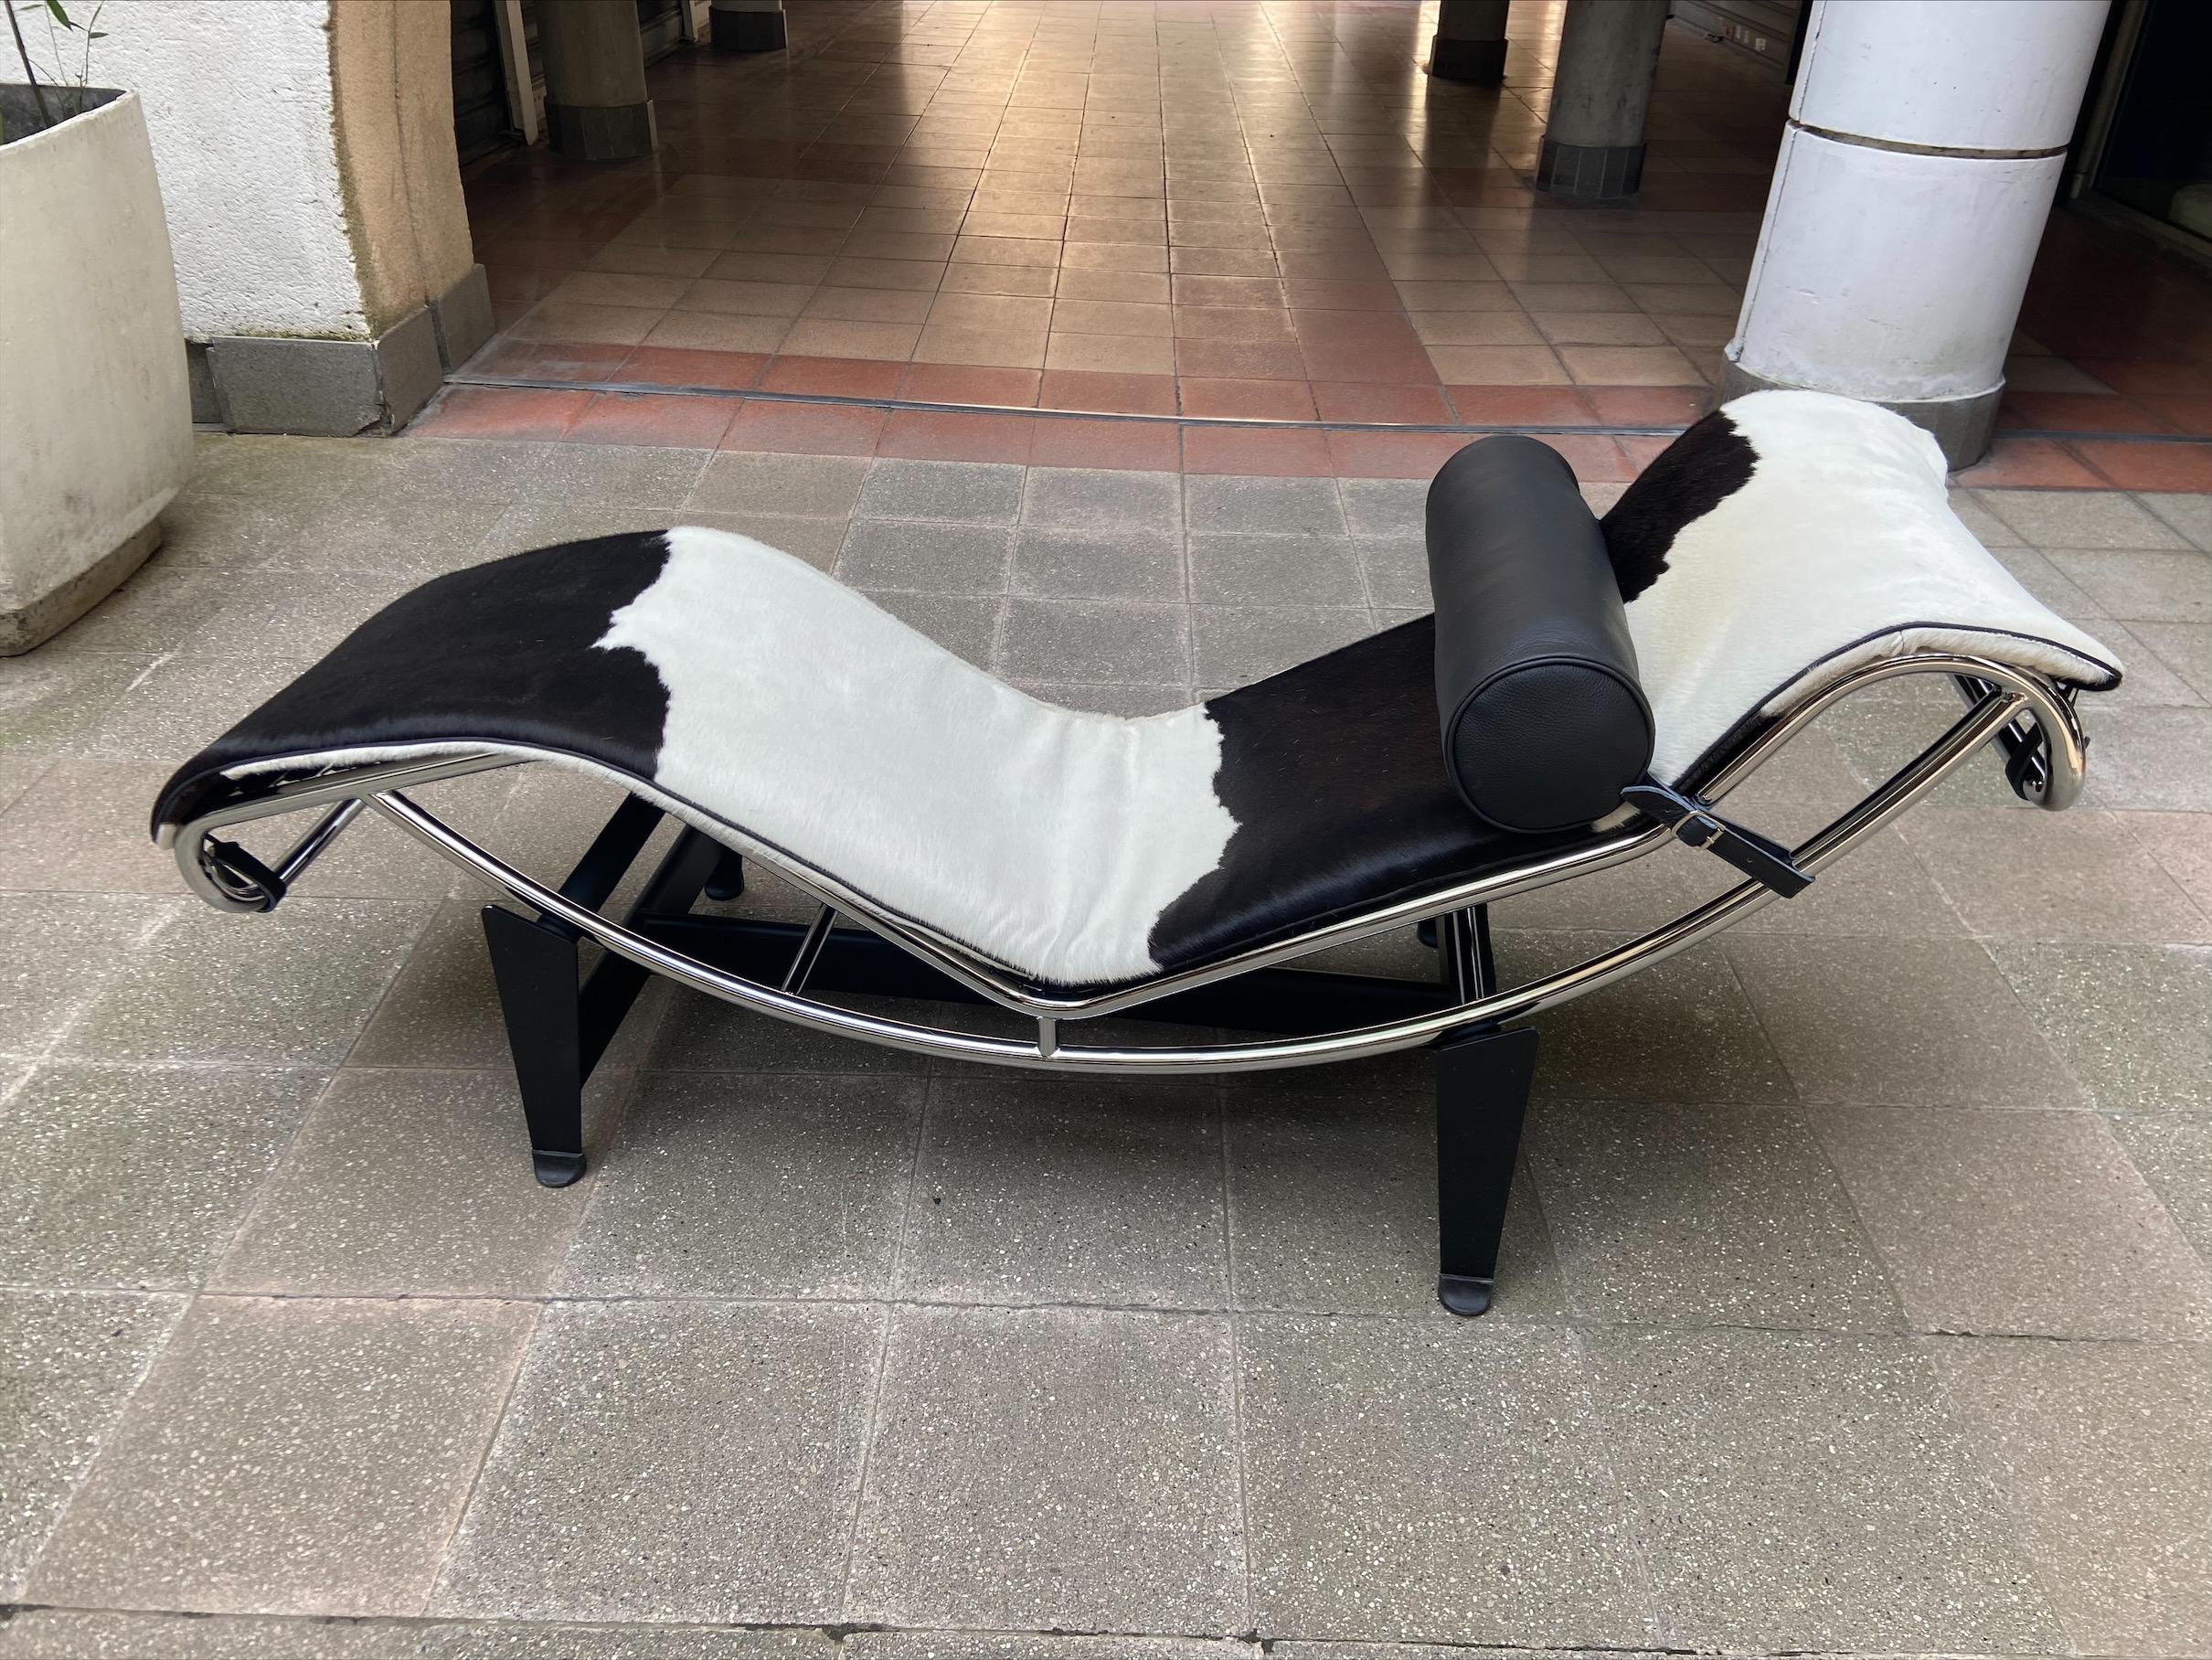 LC4 Pony lounge chair black and white 2 - Le Corbusier and Charlotte Perriand
Edition Cassina
Circa 2016
In perfect condition
Signature and engraved numbering
Cassina certificate
Black and white cowhide, black grained leather cushion
Chromed